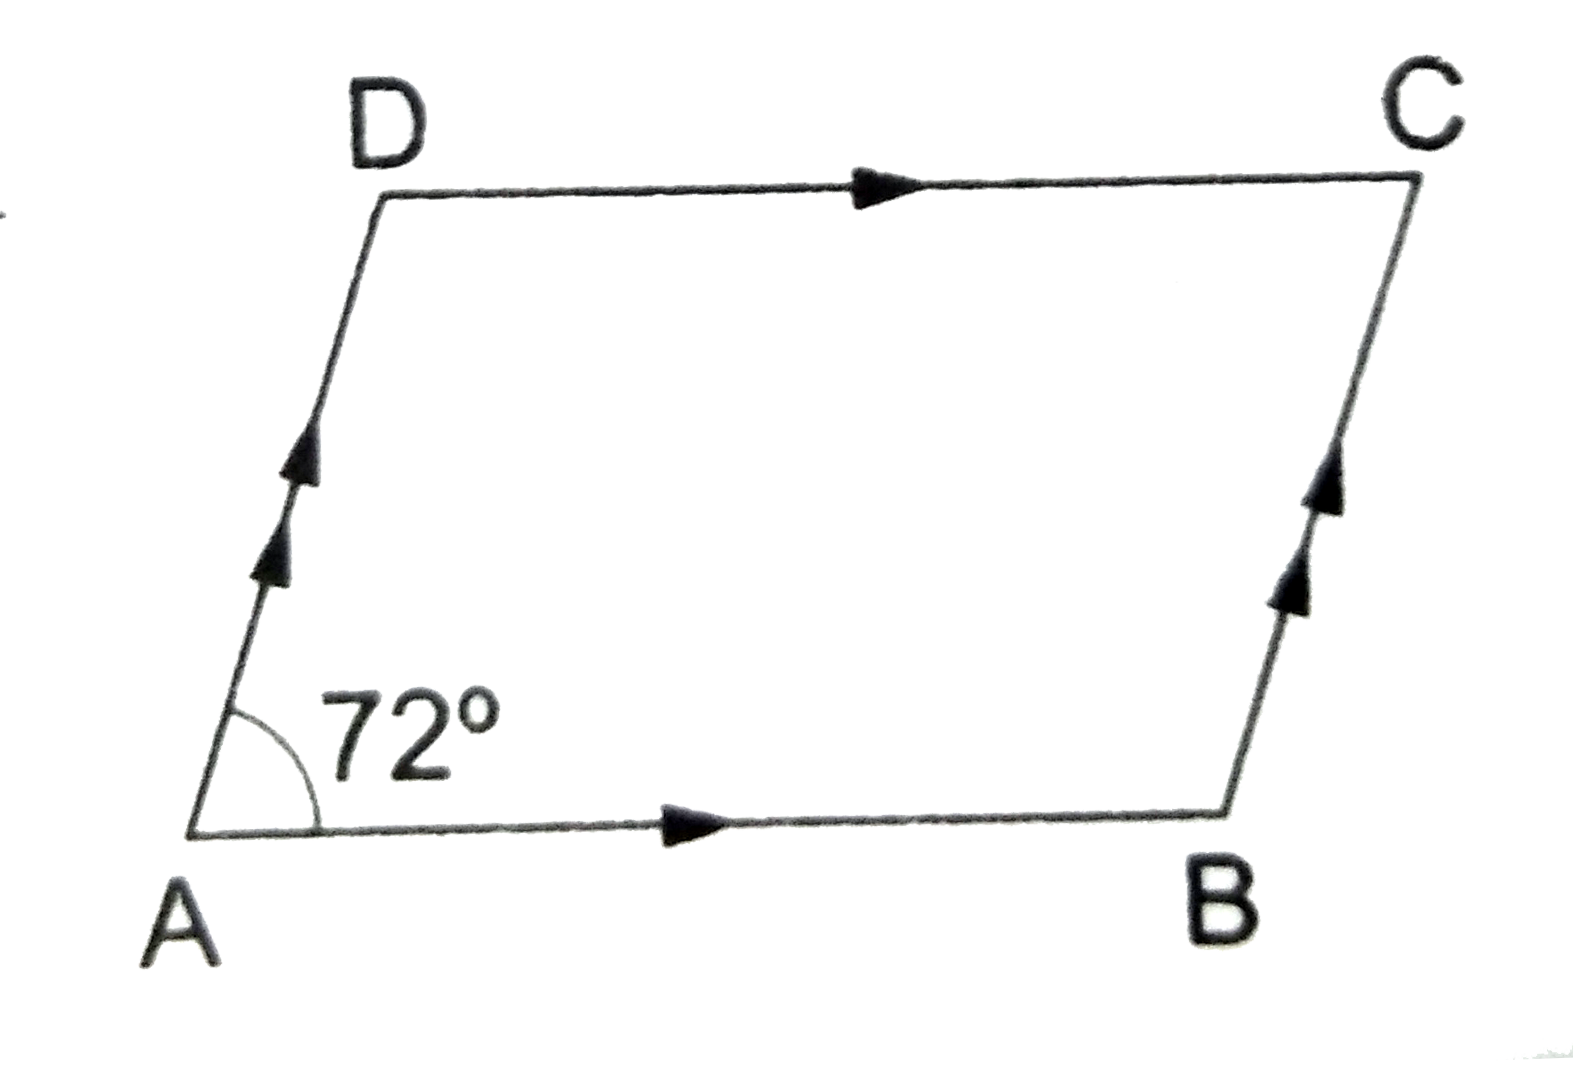 In the adjoining figure, ABCD is a parallelogram in which  angle A =72^(@).  Calculate angle B, angle C and angle D.